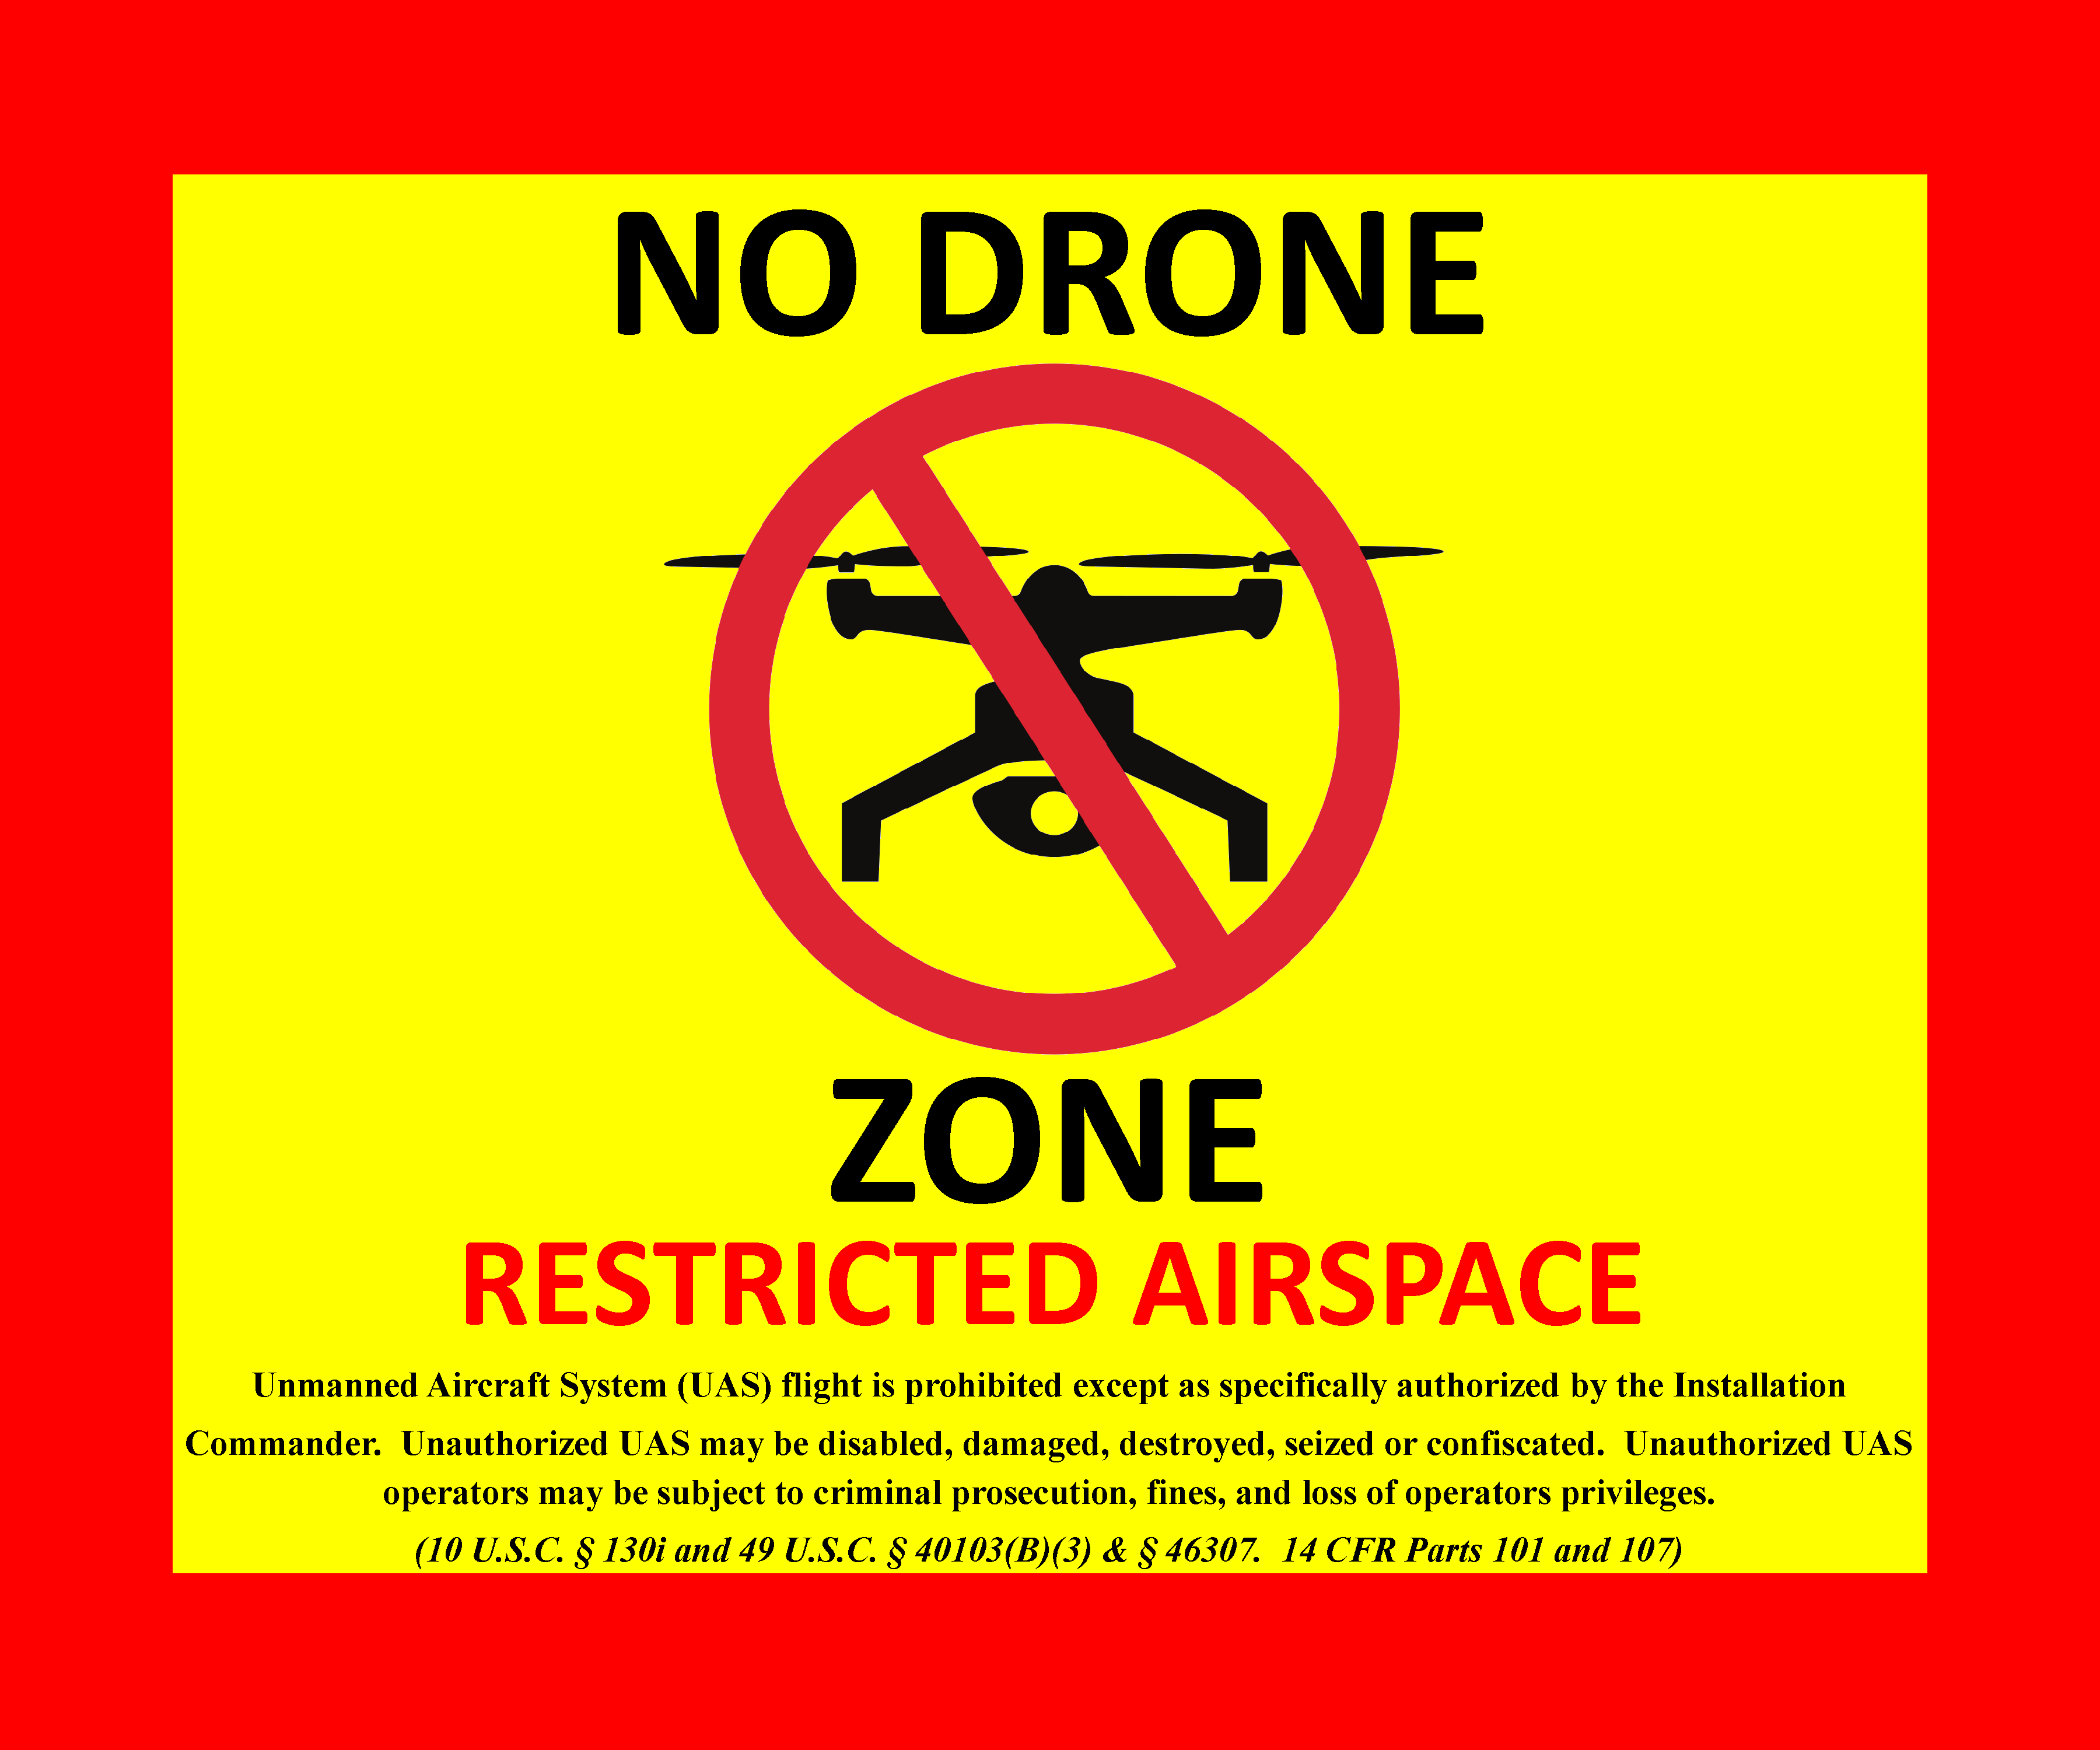 Whiteman AFB is a no drone zone